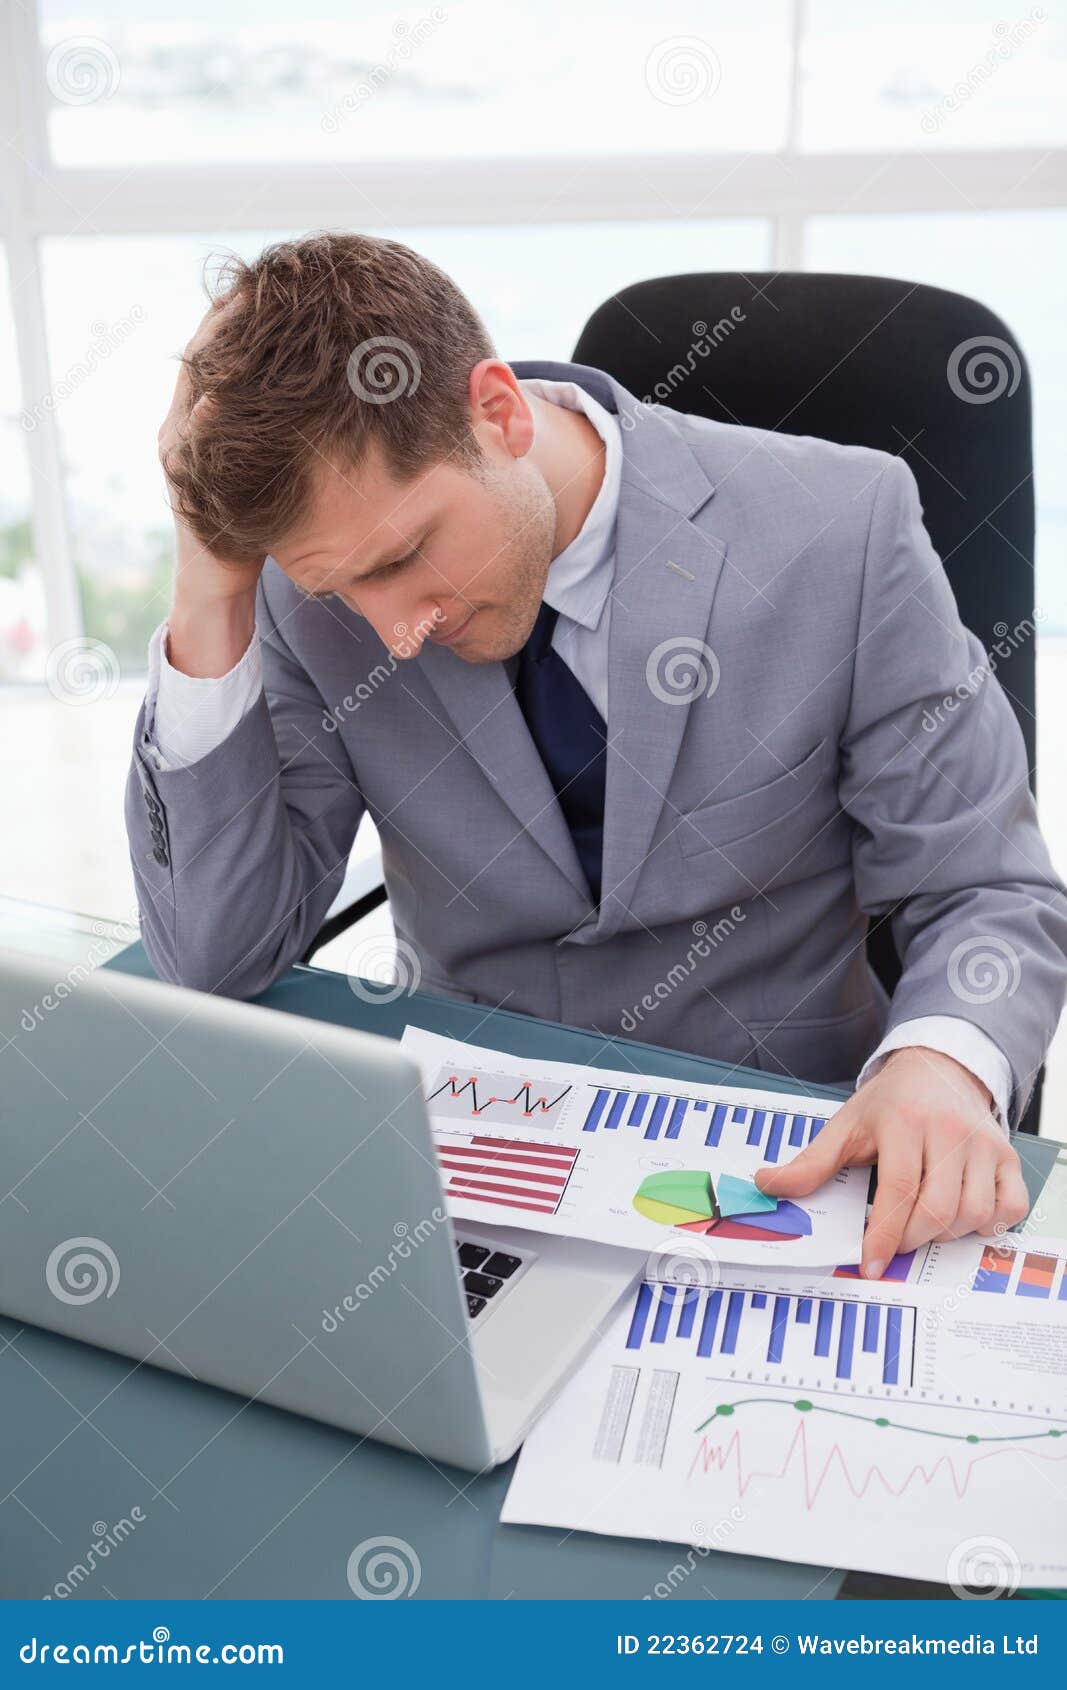 Businessman Frustrated By Market Research Results Stock Photo